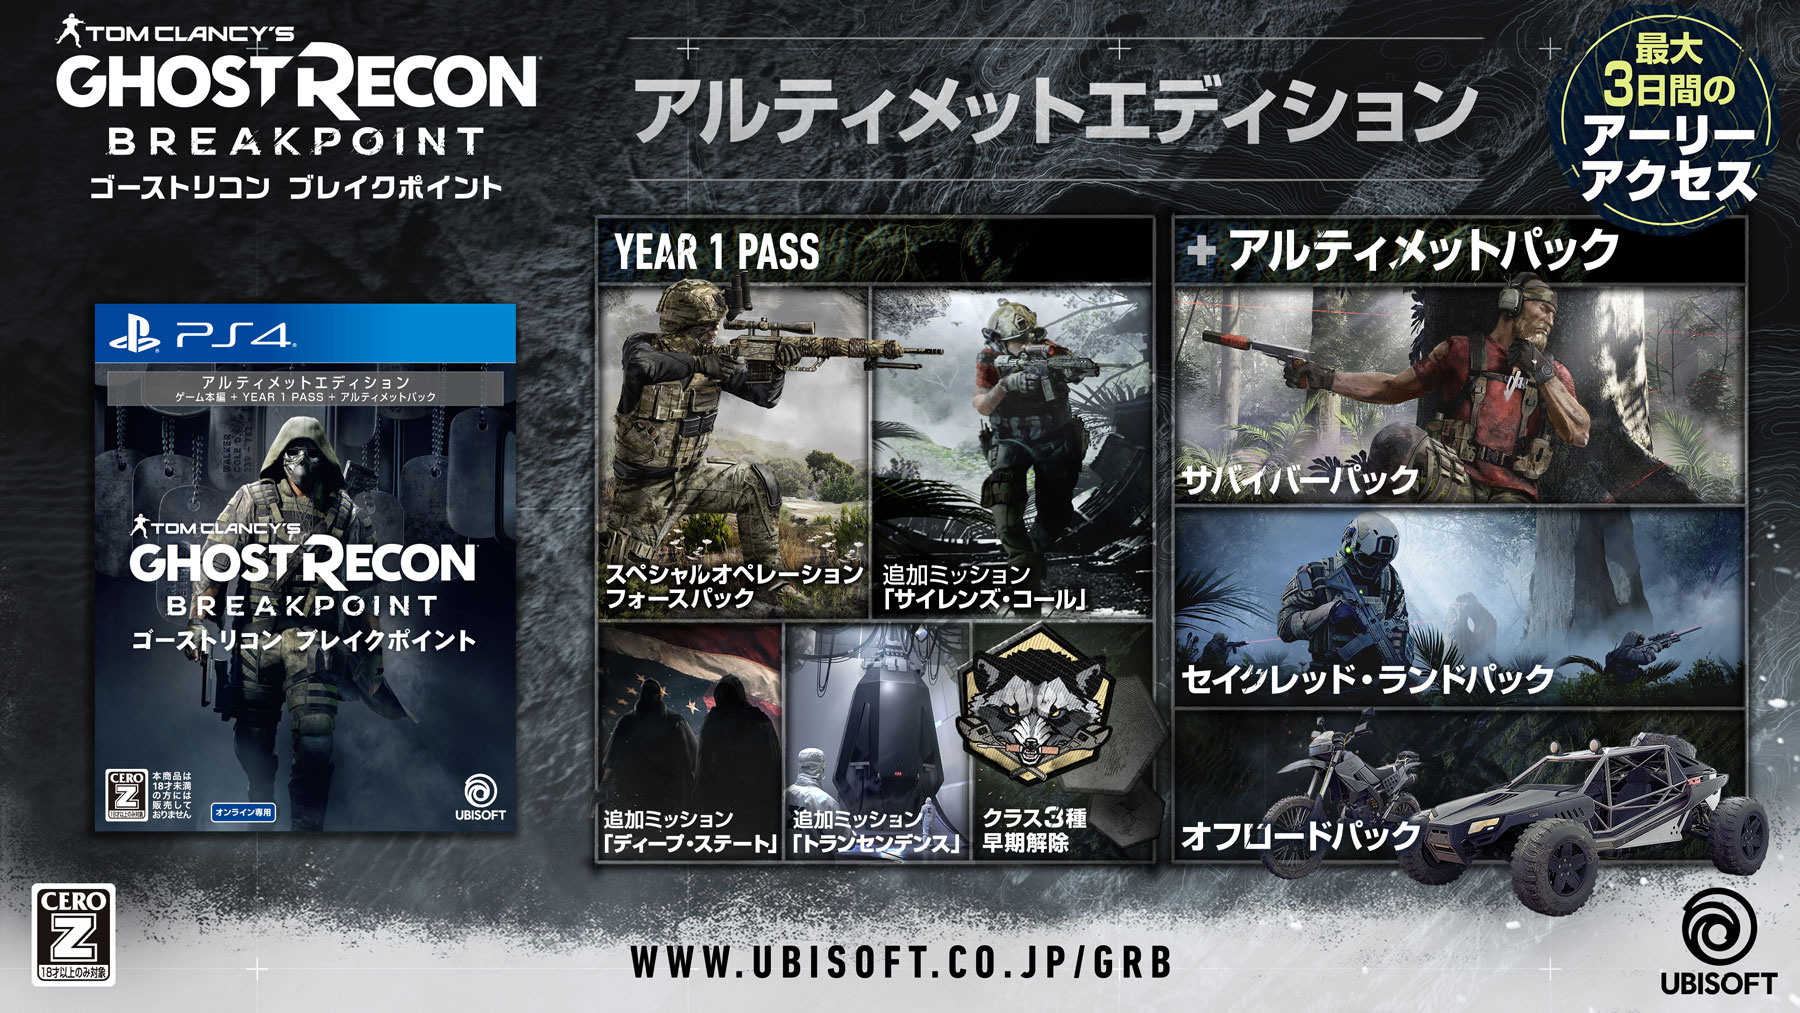 Tom Clancy's Ghost Recon breakpoint ps4 диск. Ghost Recon миномет. Диск на плейстейшен 4 Ghost Recon Break point. ГОСТ Рекон брейкпоинт ультимейт эдишн ps4. Tom clancy s ultimate edition